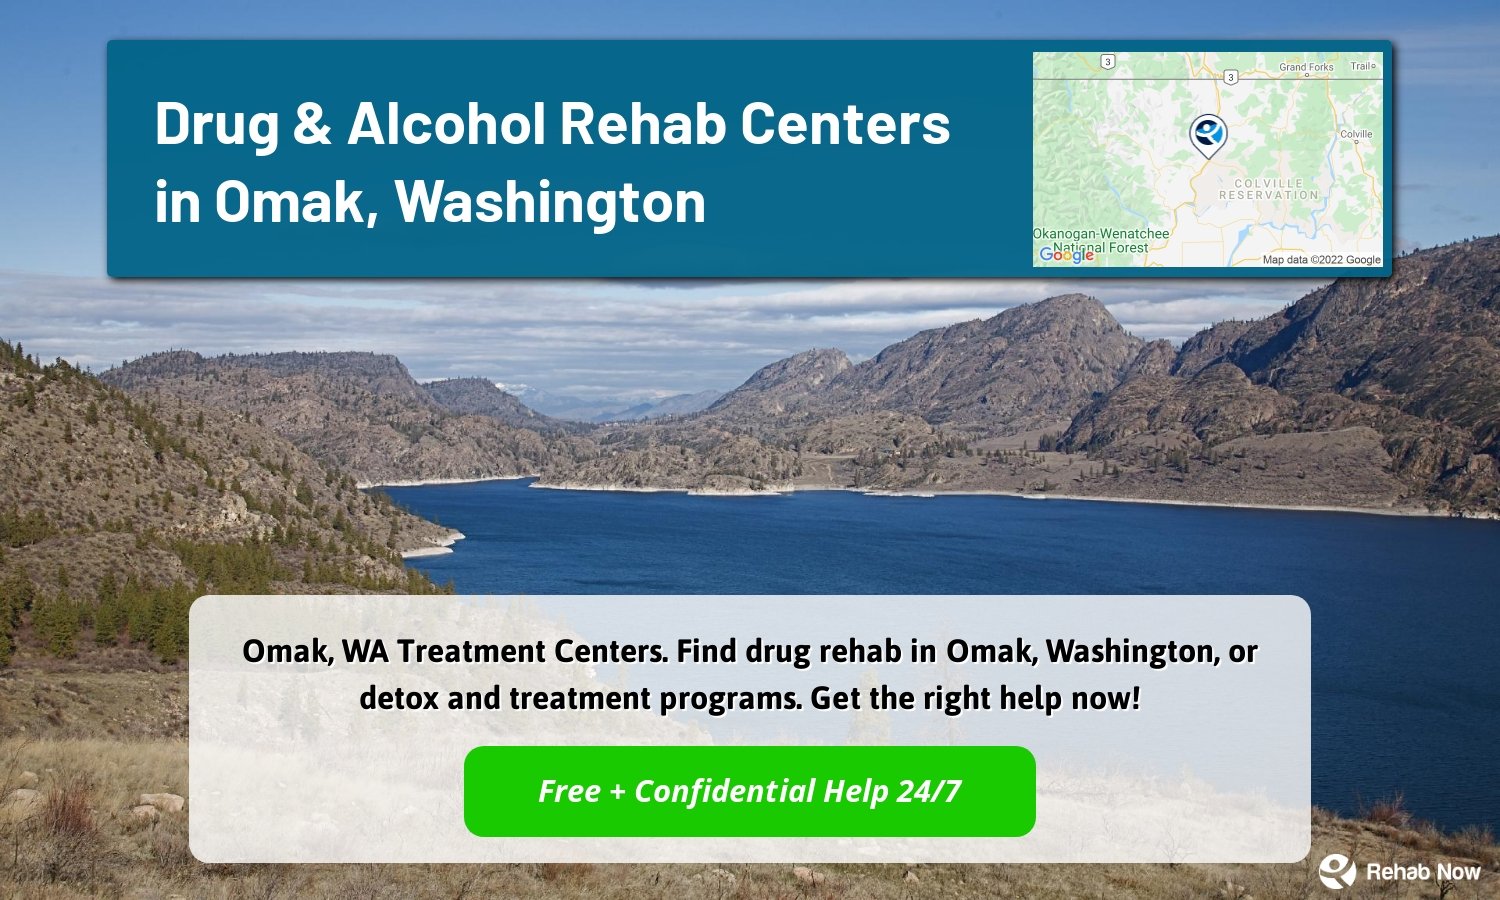 Omak, WA Treatment Centers. Find drug rehab in Omak, Washington, or detox and treatment programs. Get the right help now!